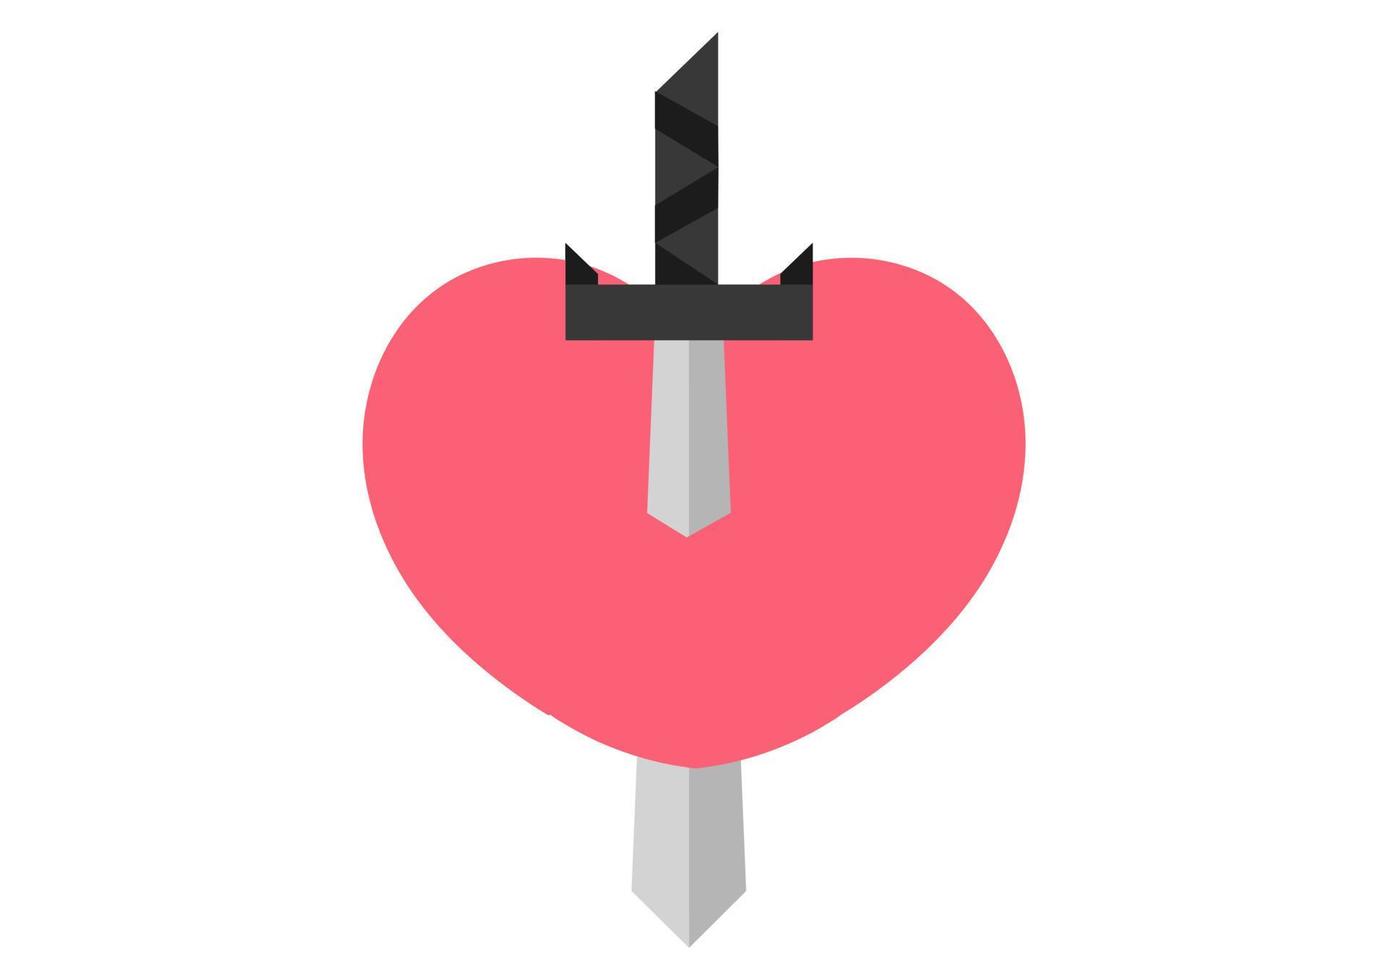 heart and sword illustration 3 vector